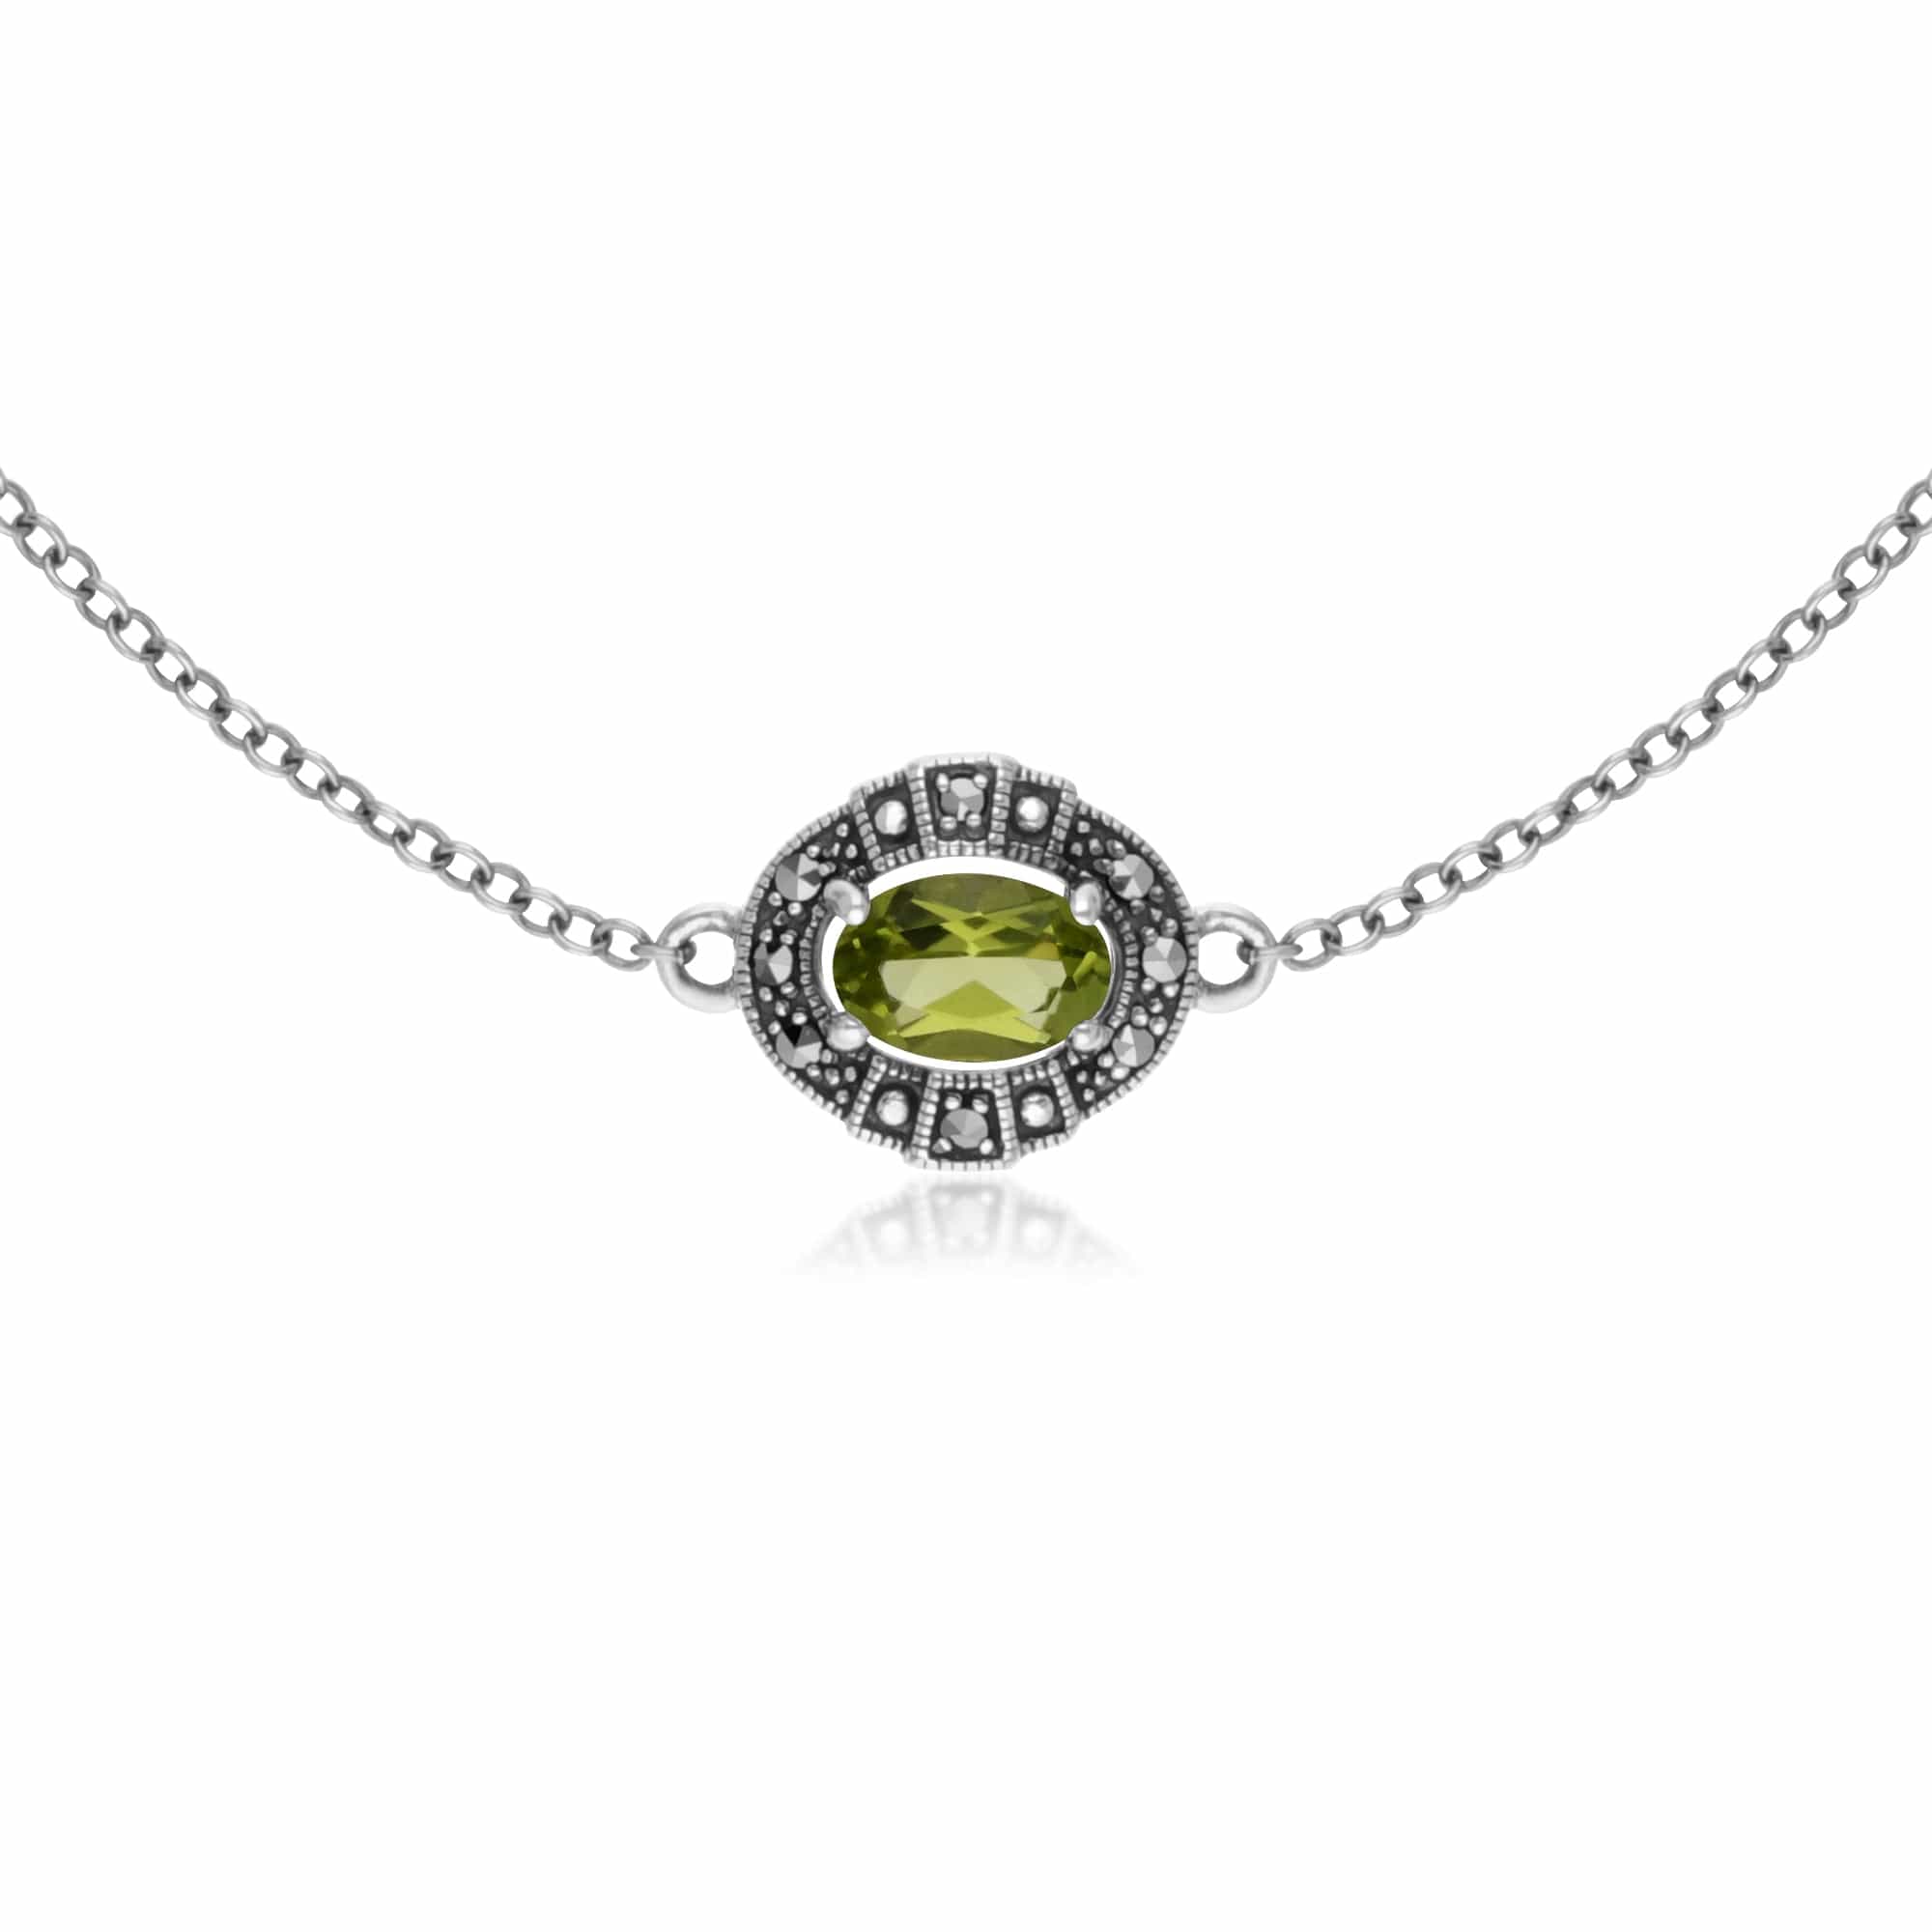 214L165404925-214R605704925 Art Deco Style Oval Peridot and Marcasite Cluster Ring & Bracelet Set in 925 Sterling Silver 2